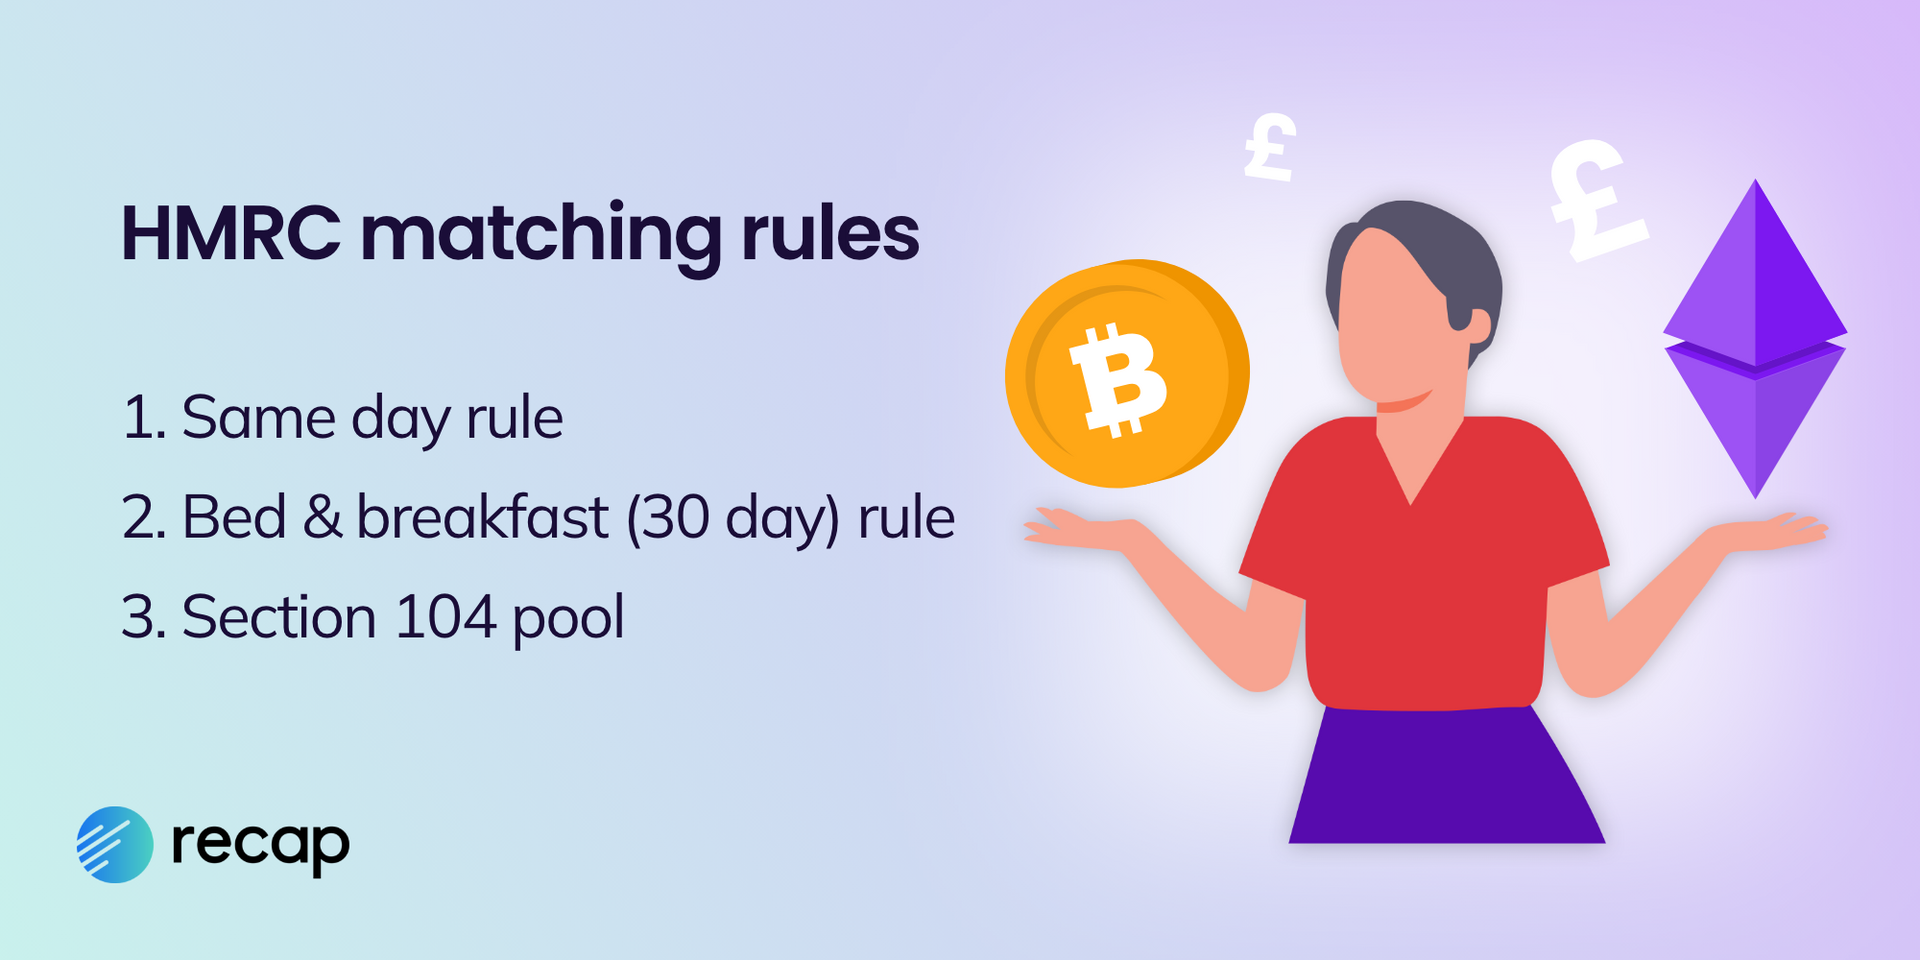 An illustration of a confused individual surrounded by Bitcoin, Ethereum and £ signs, next to HMRCs matching rules steps - 1. same day rule, 2. bed and breakfast rule, 3. section 104 pool.